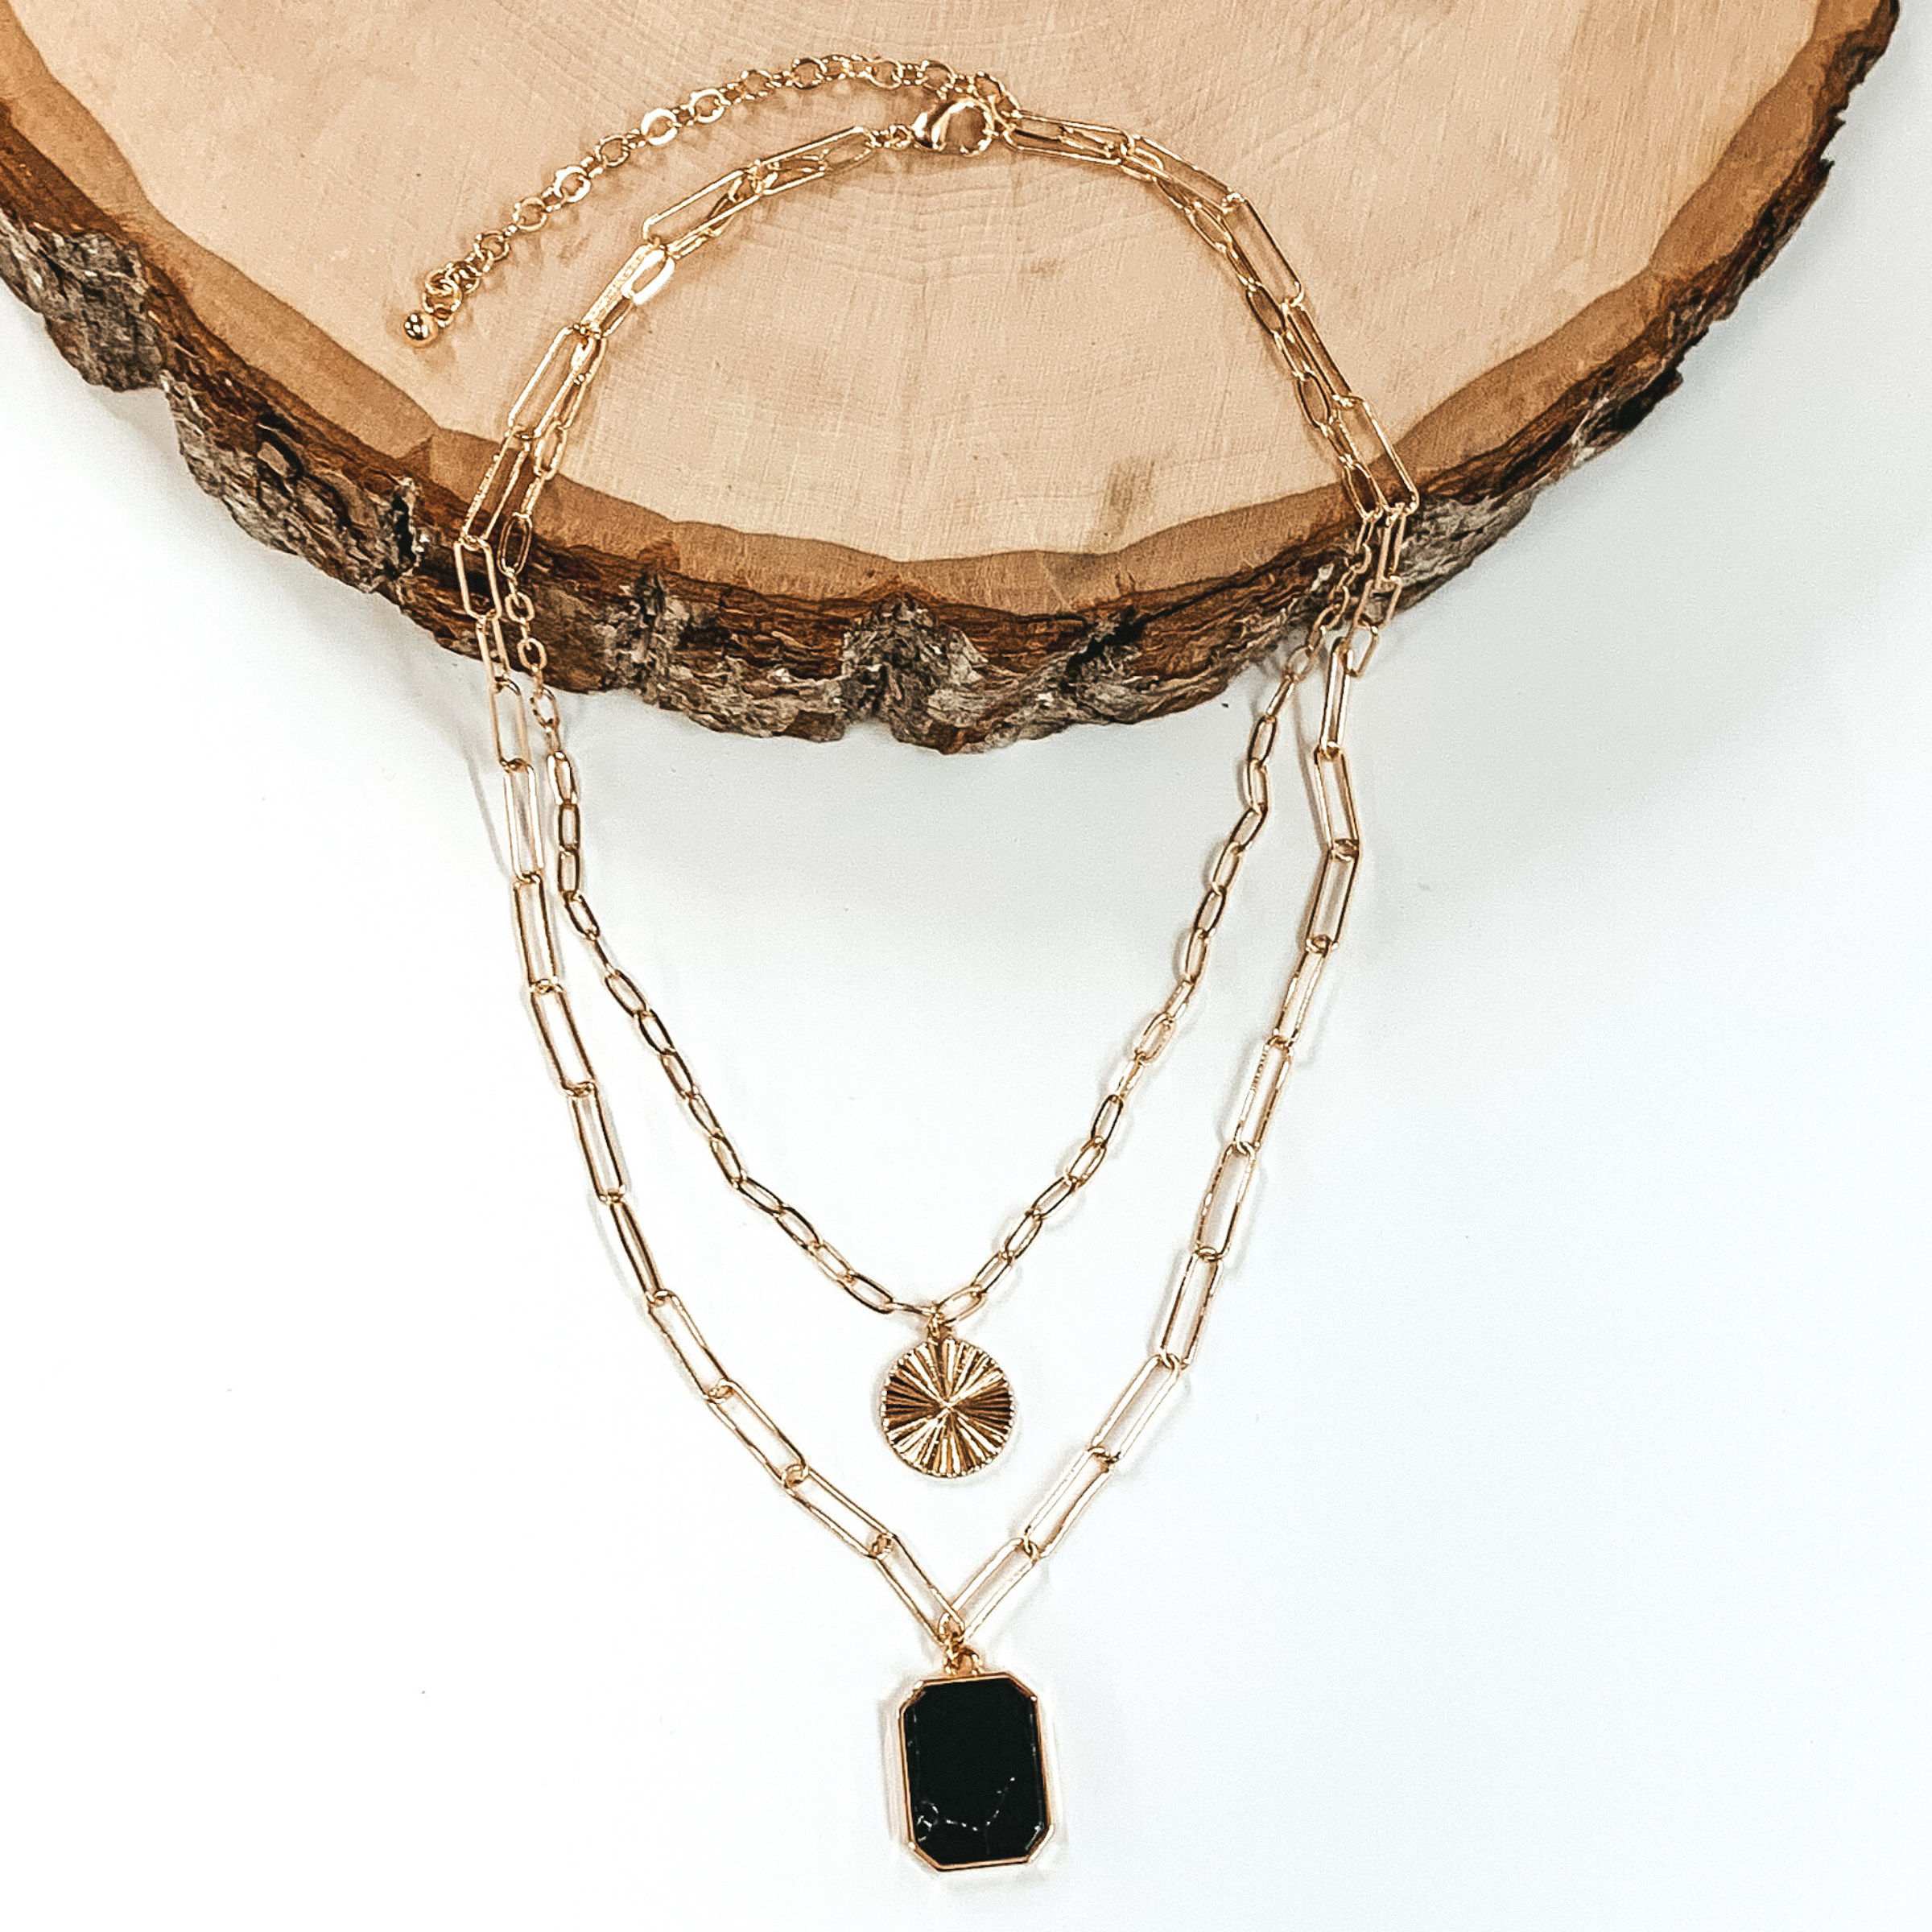 Double layered paperclip chain necklace in gold. The shorter strand has a gold circle pendant and the longer strand has a black stone pendant in a long octagon shape. This necklace is half laying on a piece of wood and is pictured on a white background.